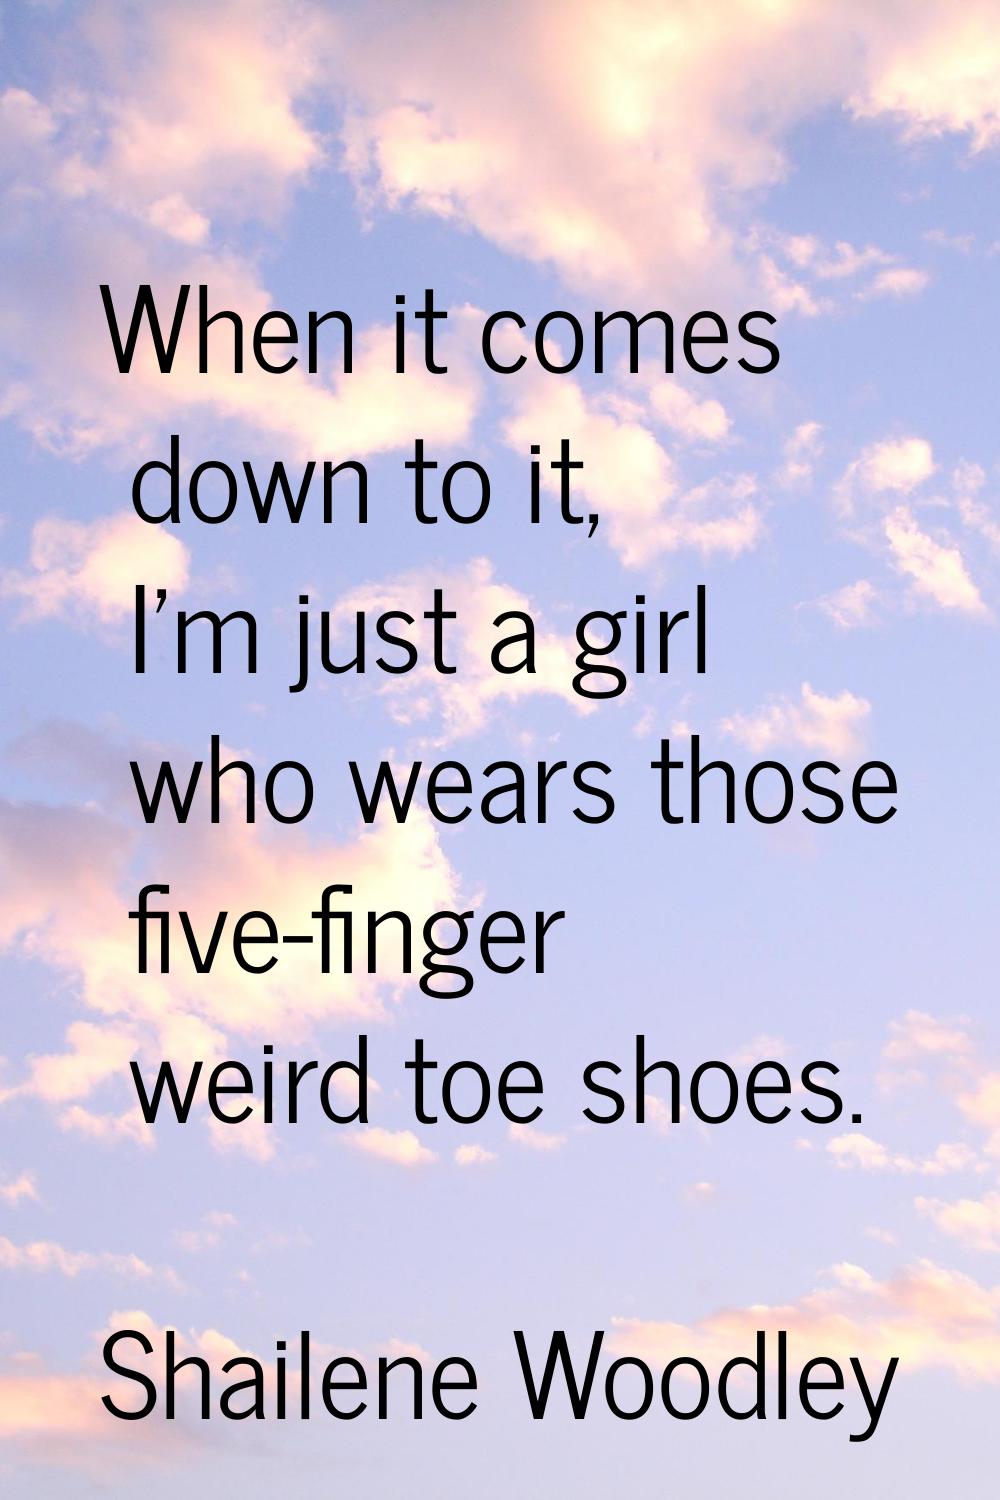 When it comes down to it, I'm just a girl who wears those five-finger weird toe shoes.